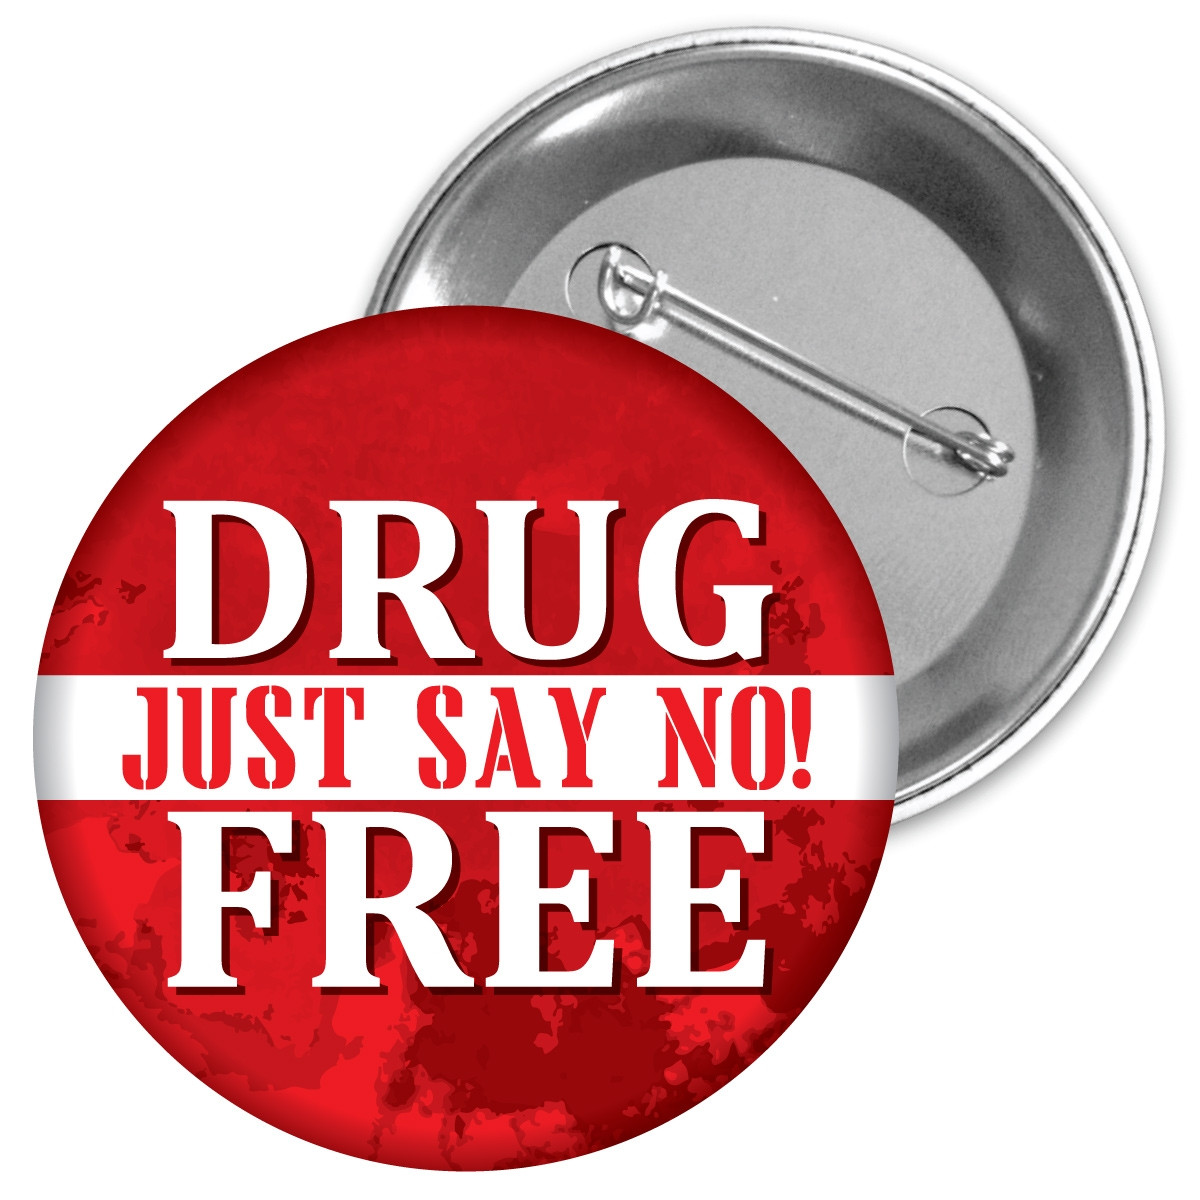 Metal Button - Drug Free (Just Say No!)